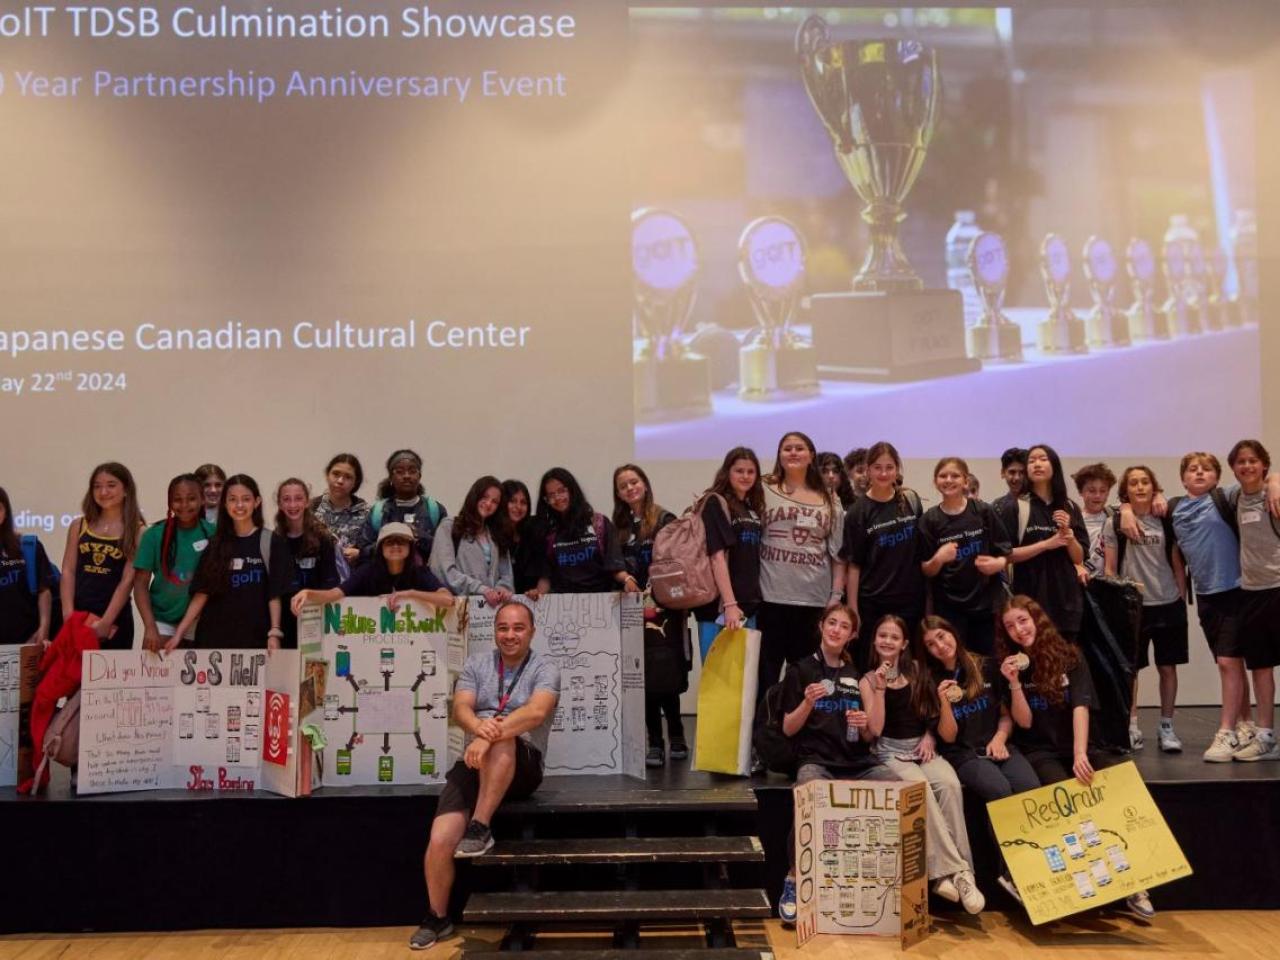 A group of students posed on a stage with project boards.